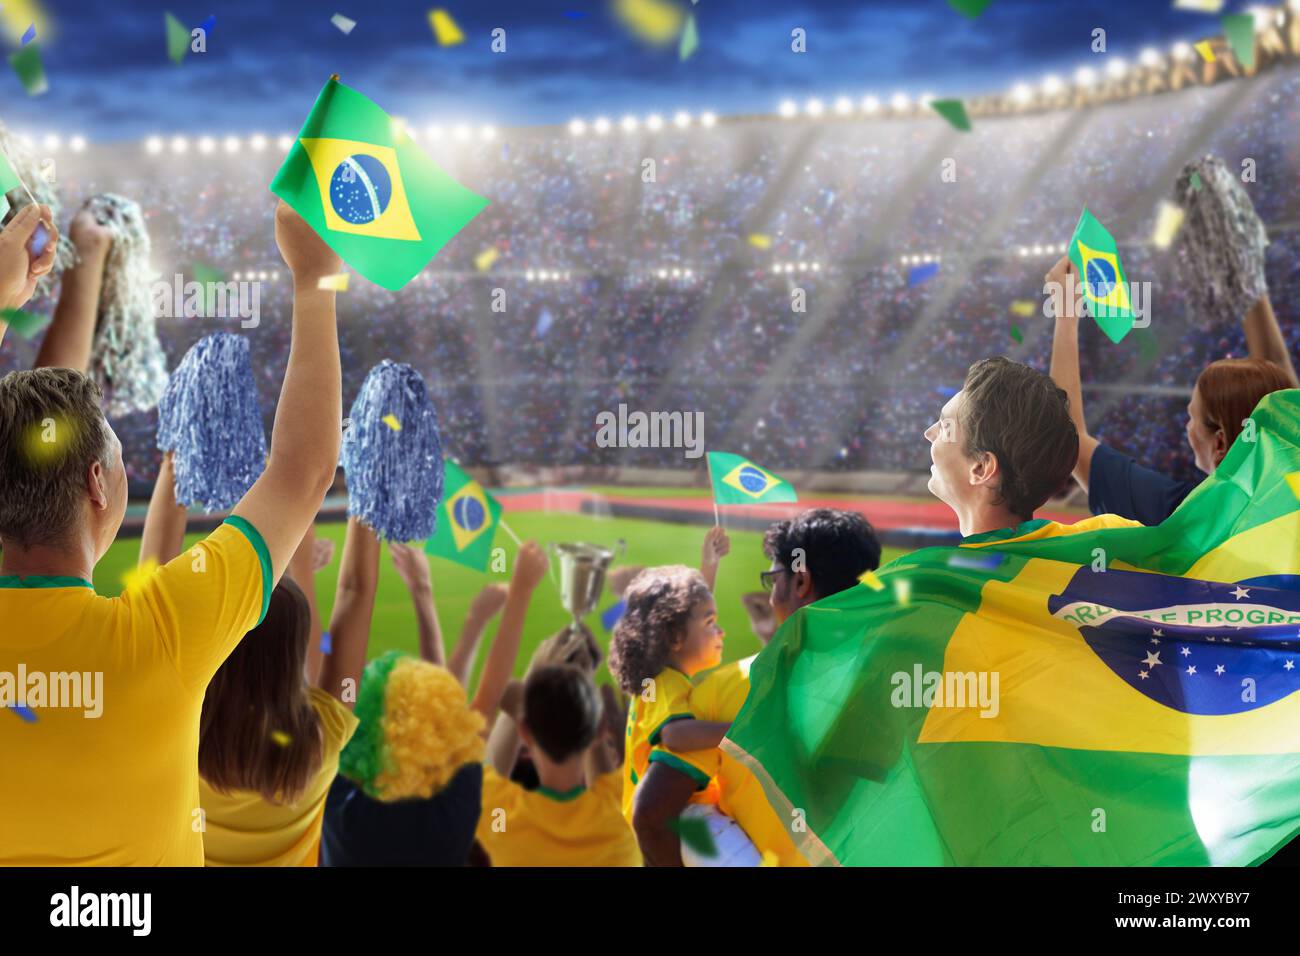 Brazil football supporter on stadium. Brazilian fans on soccer pitch watching team play. Group of supporters with flag and national jersey cheering Stock Photo